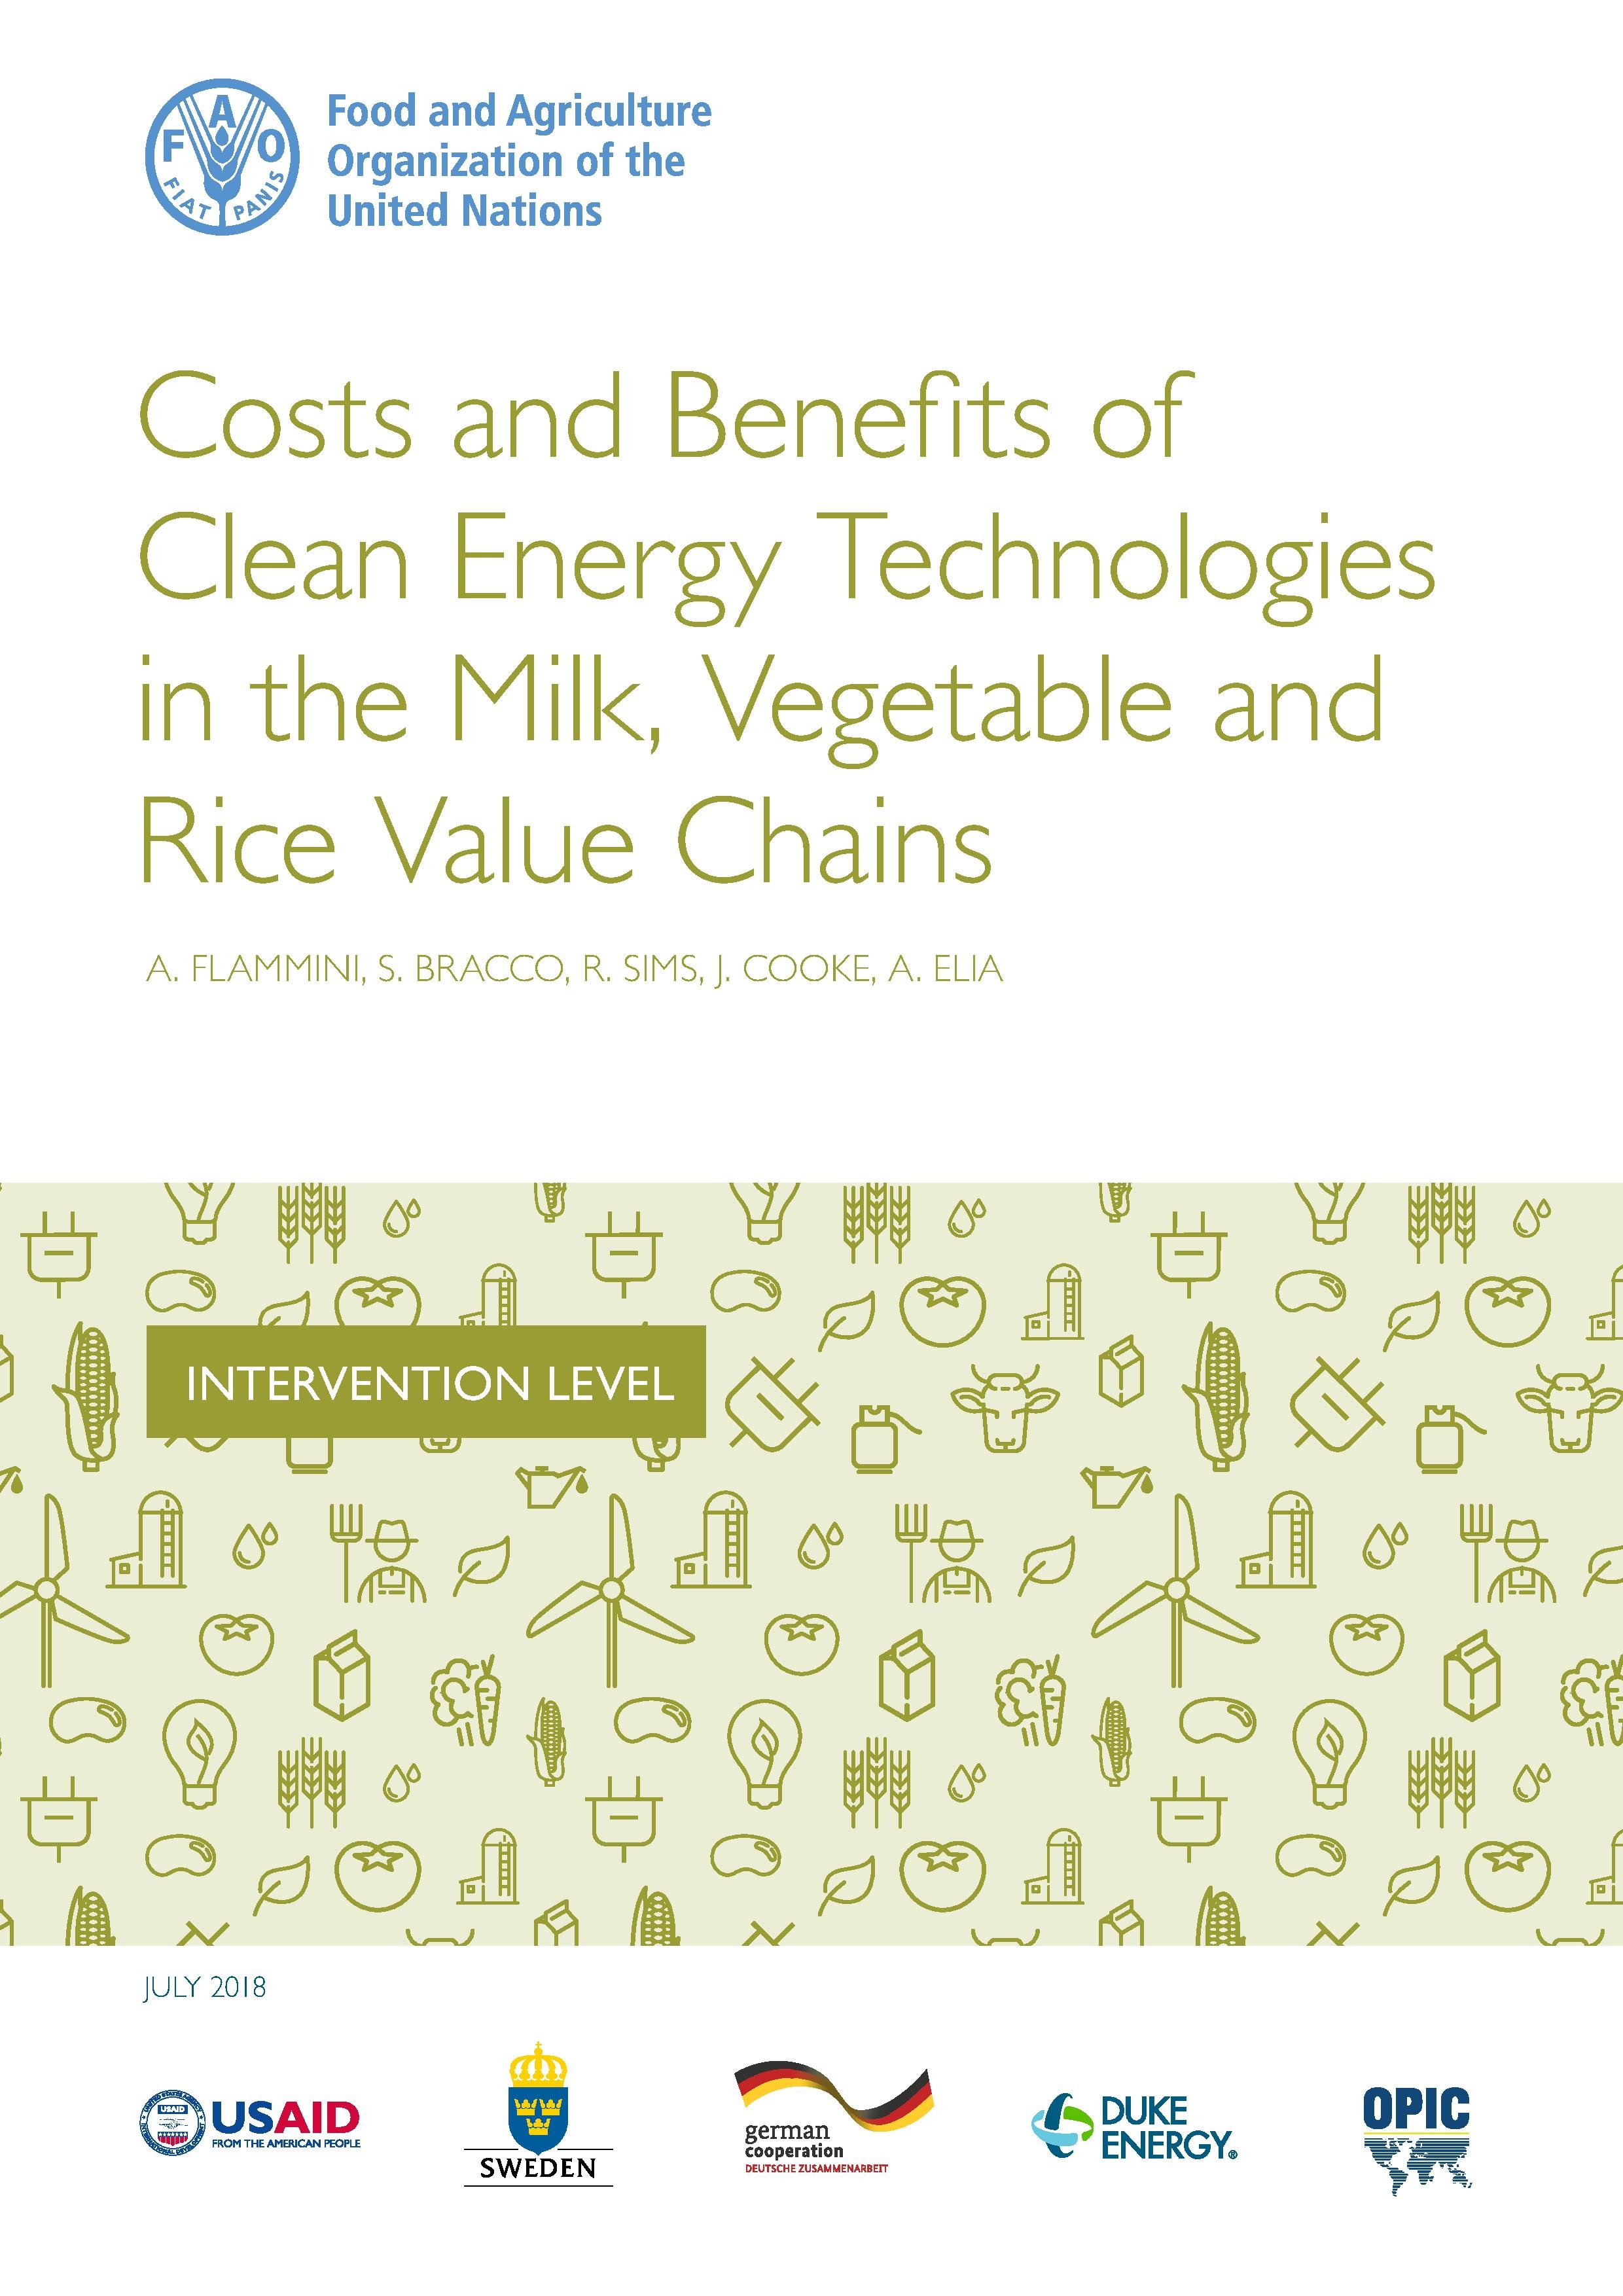 FAO (2018). The Costs and benefits of clean energy technologies in the milk, vegetable and rice value chains.